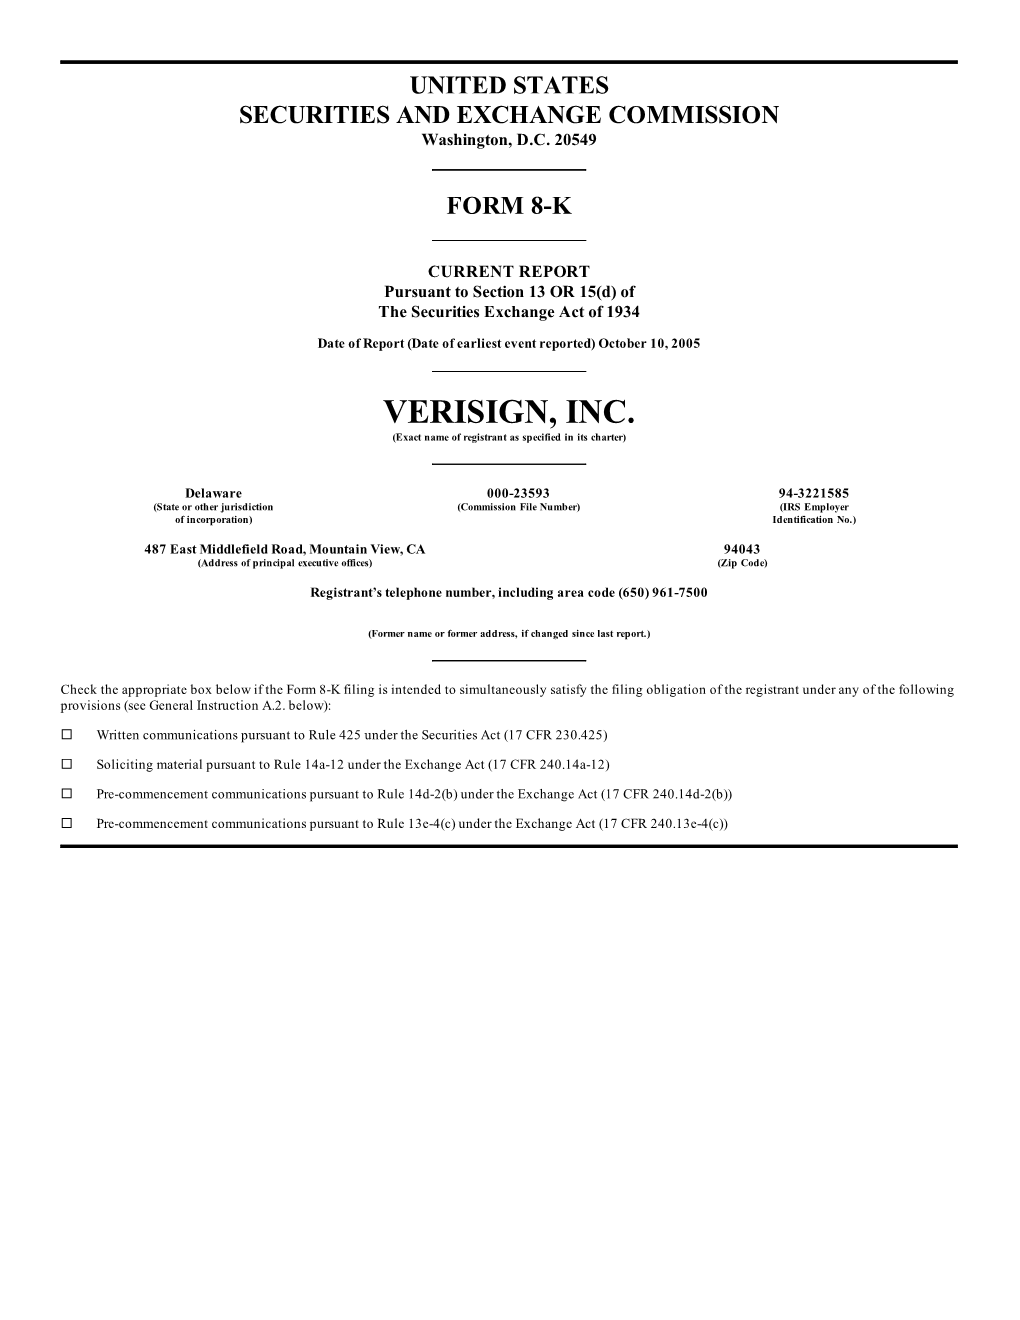 VERISIGN, INC. (Exact Name of Registrant As Specified in Its Charter)